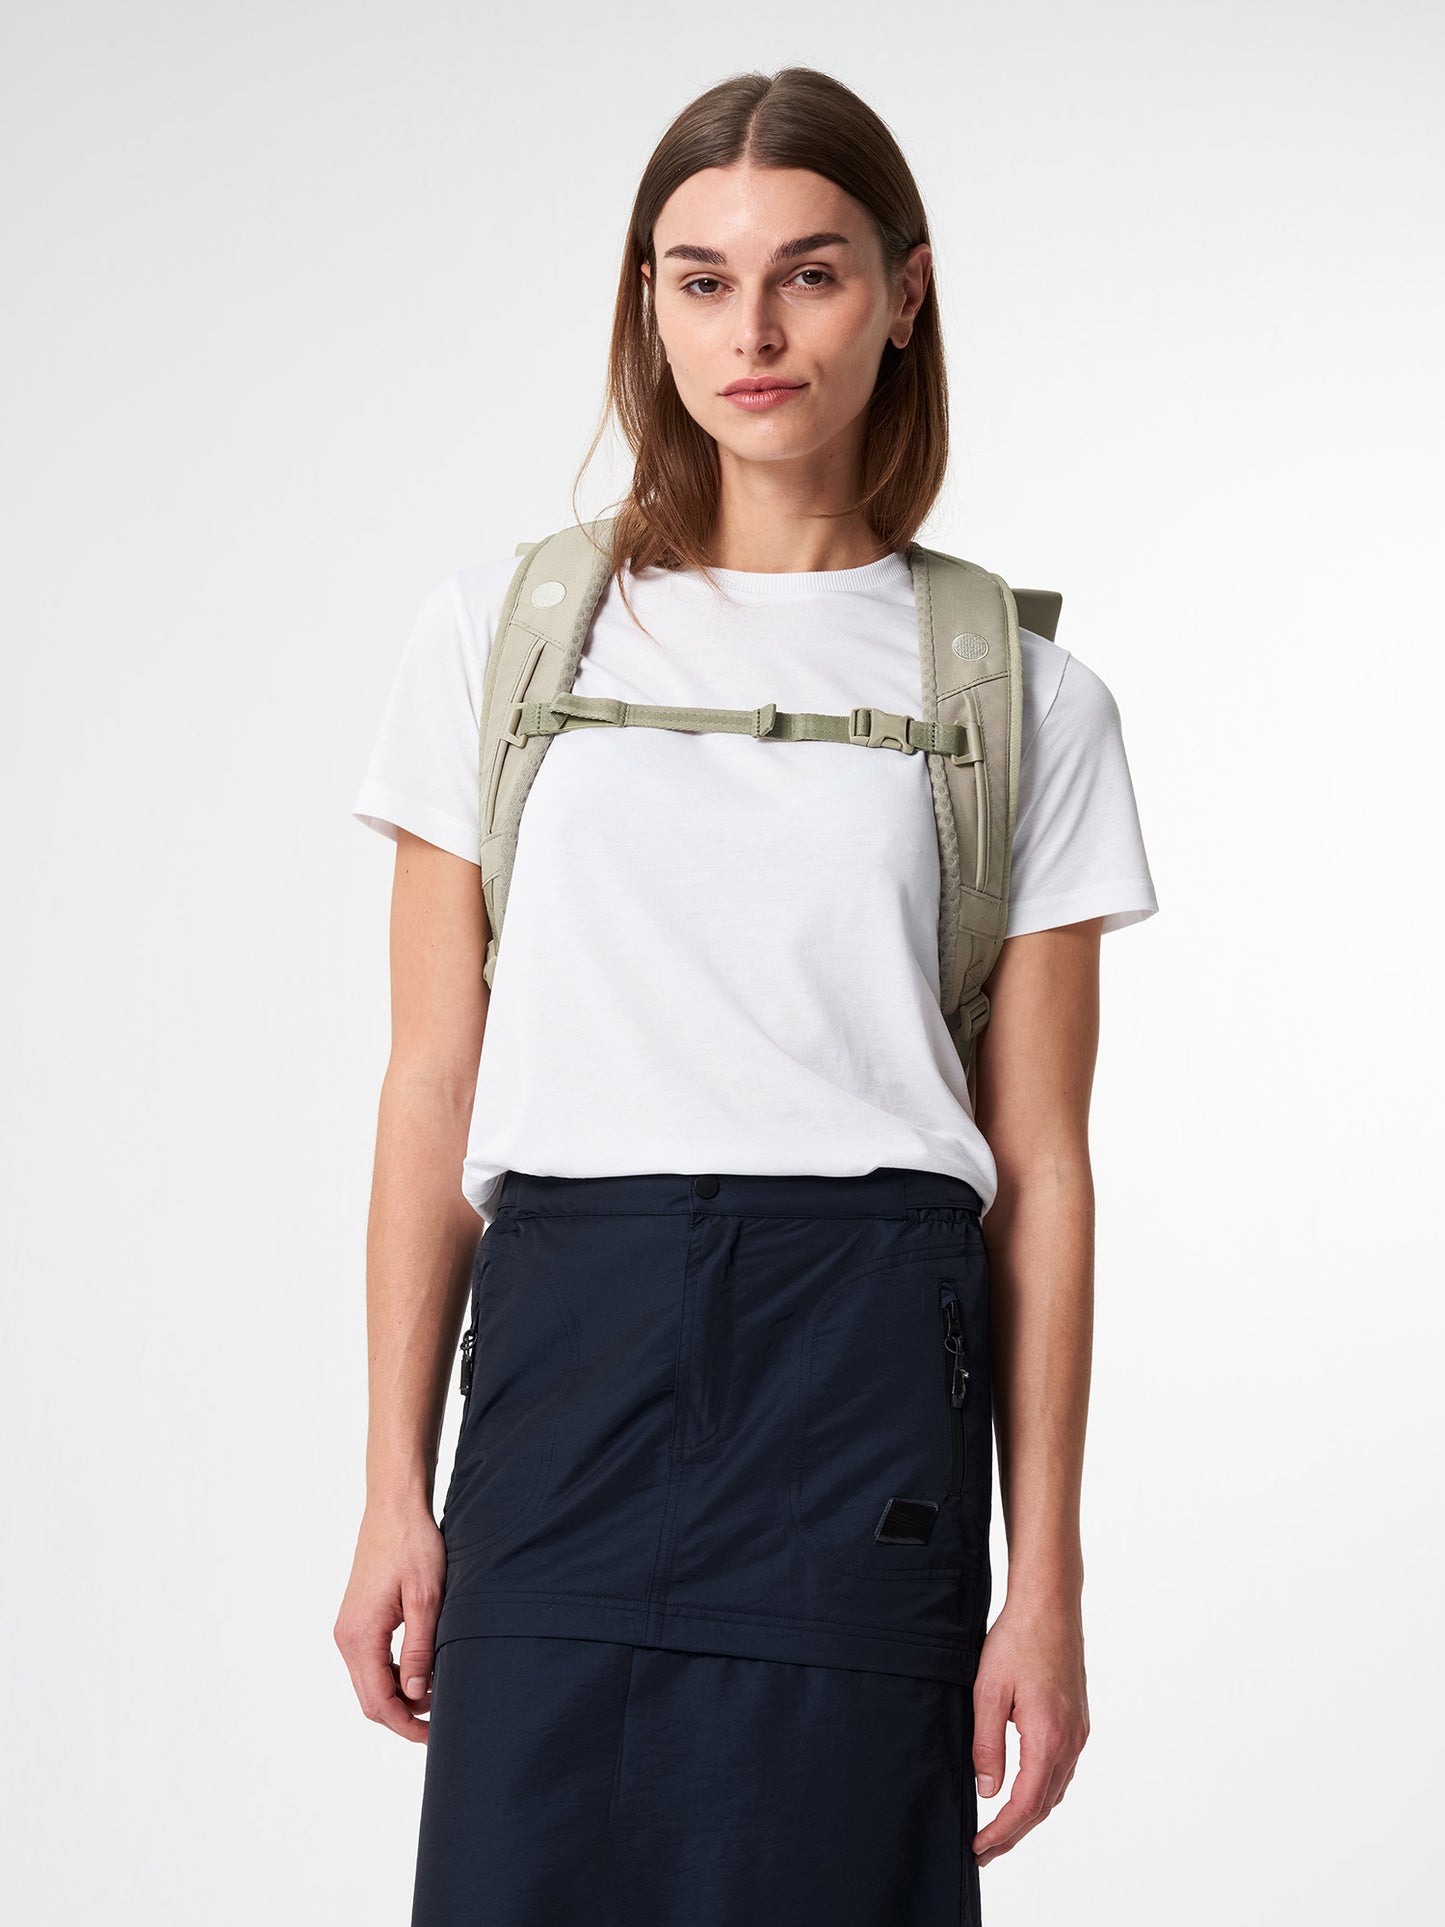 pinqponq - KROSS  Daypack Plus Reed Olive